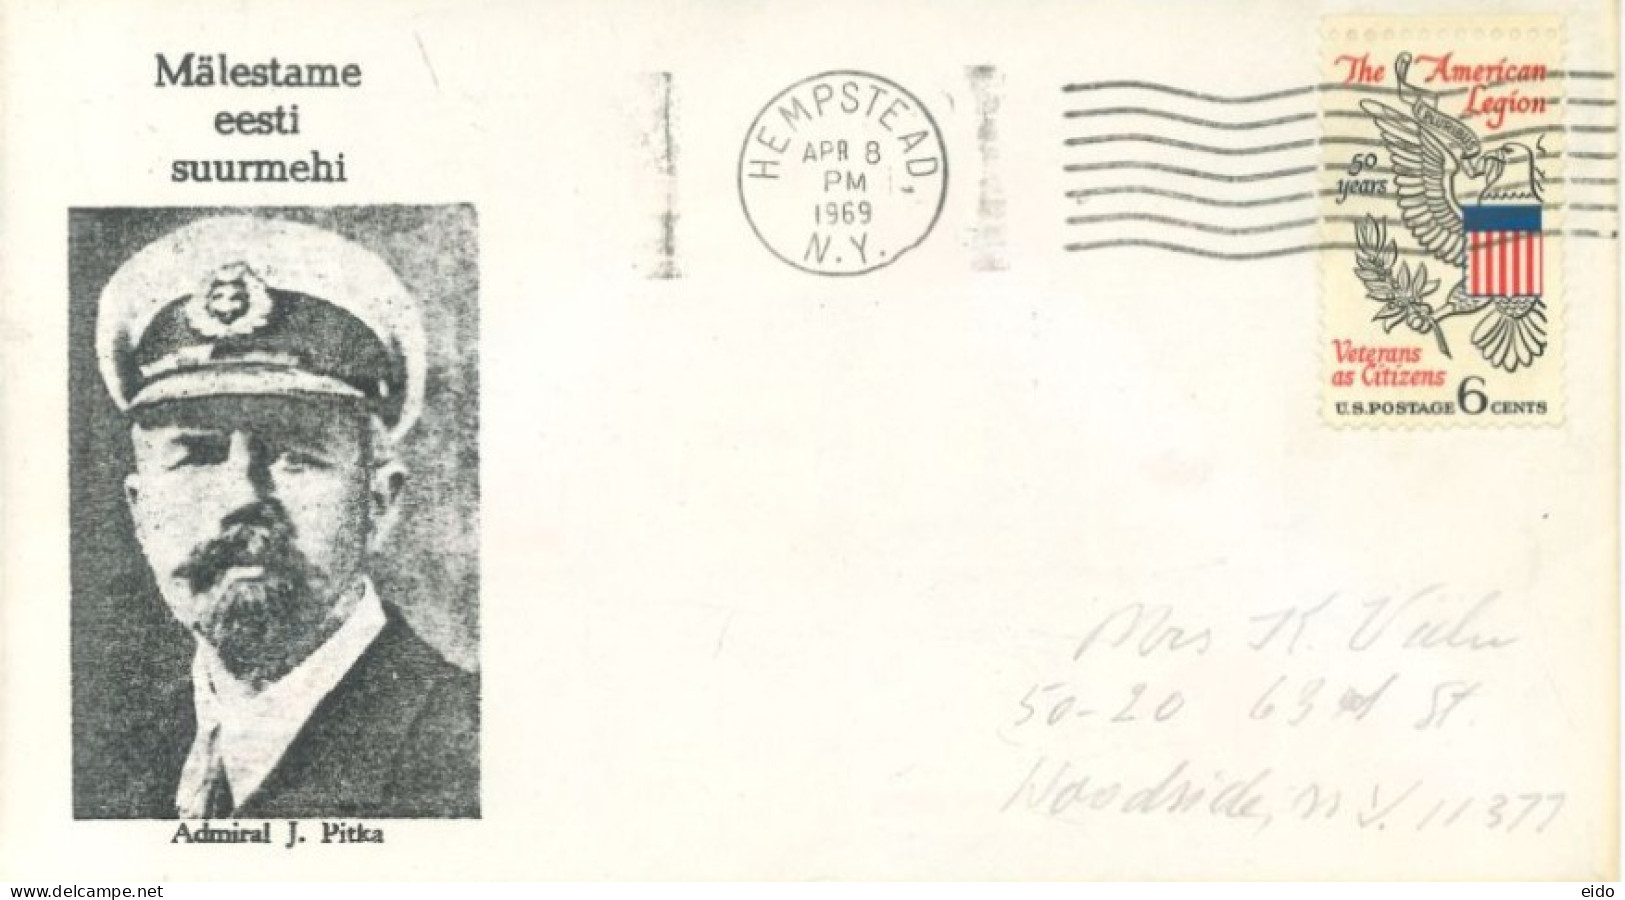 U.S.A.. -1969 -  SPECIAL STAMP COVER OF ADMIRAL J. PITKA SENT TO NEW YORK. - Storia Postale